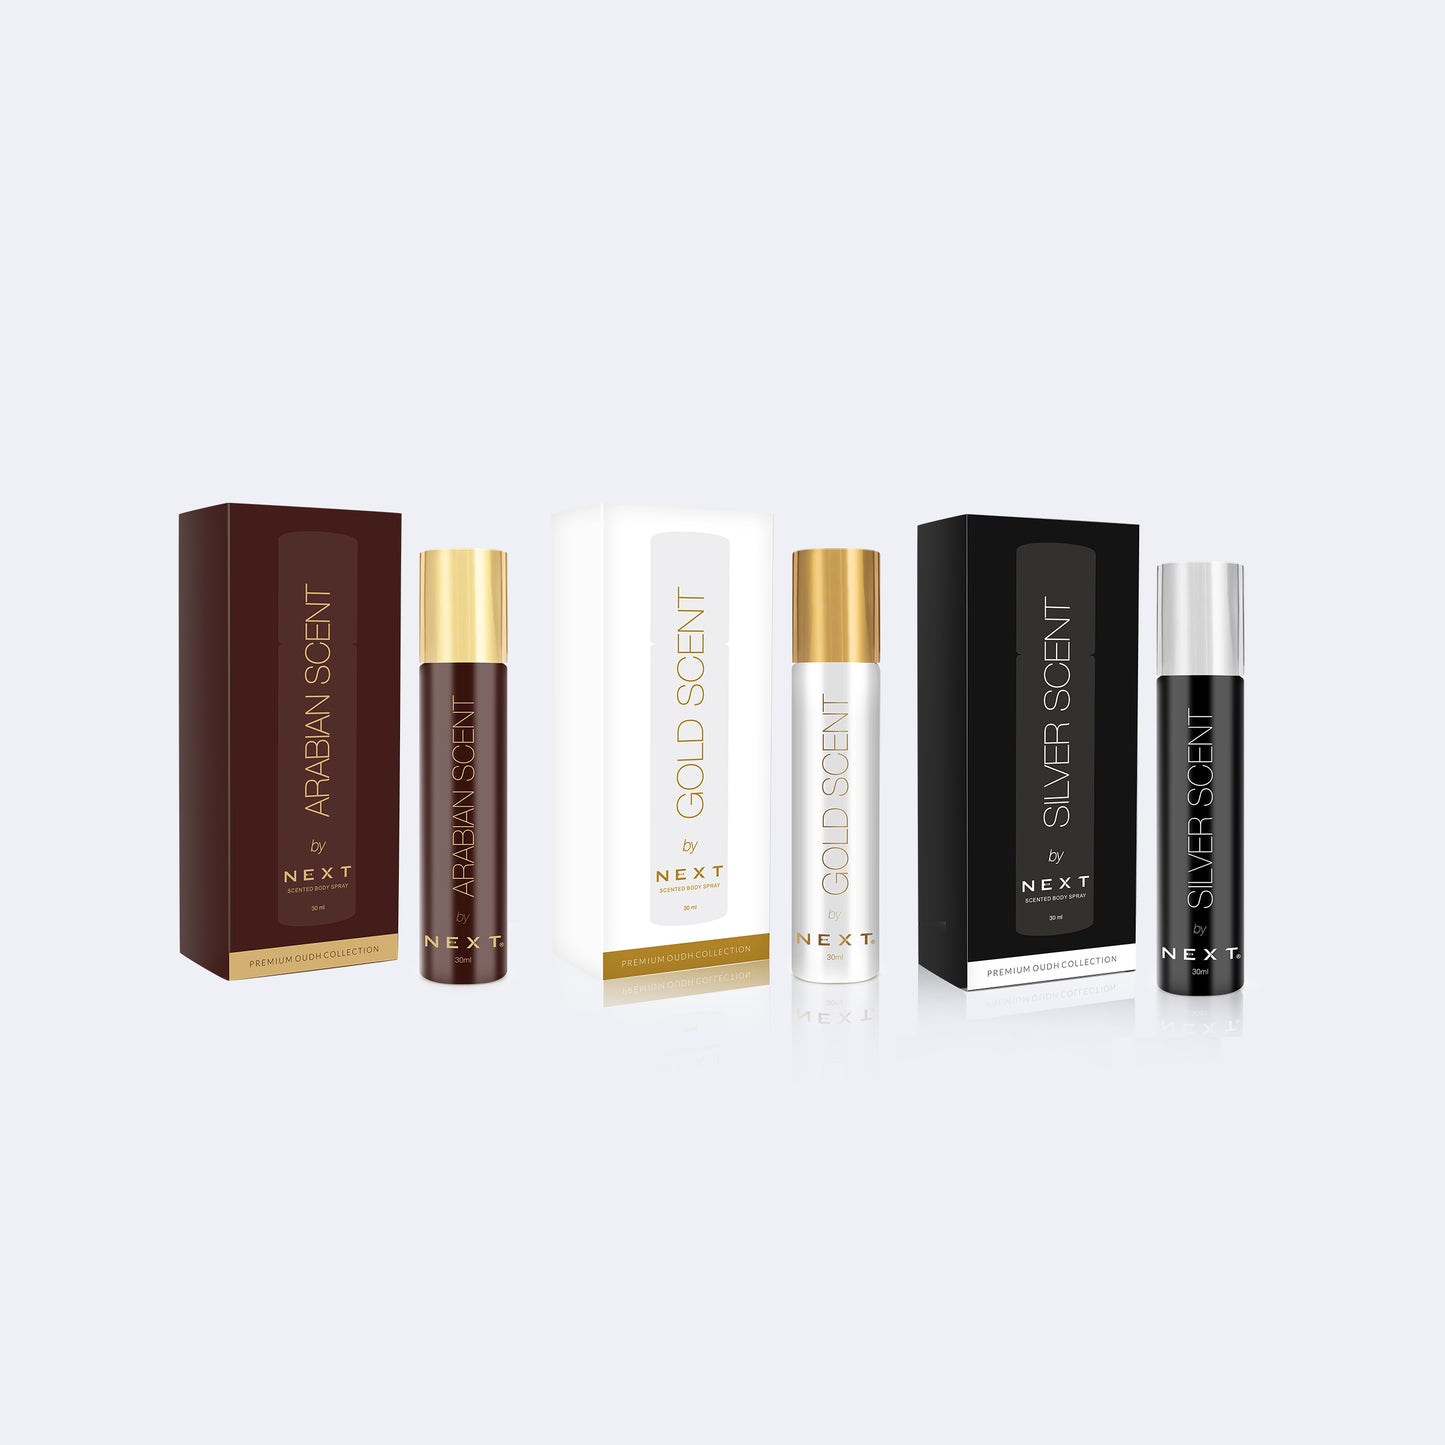 Next combo pack of 3 Luxury Oudh Fragrances - Gold Scent | Arabian Scent| Silver Scent - 30ML EACH